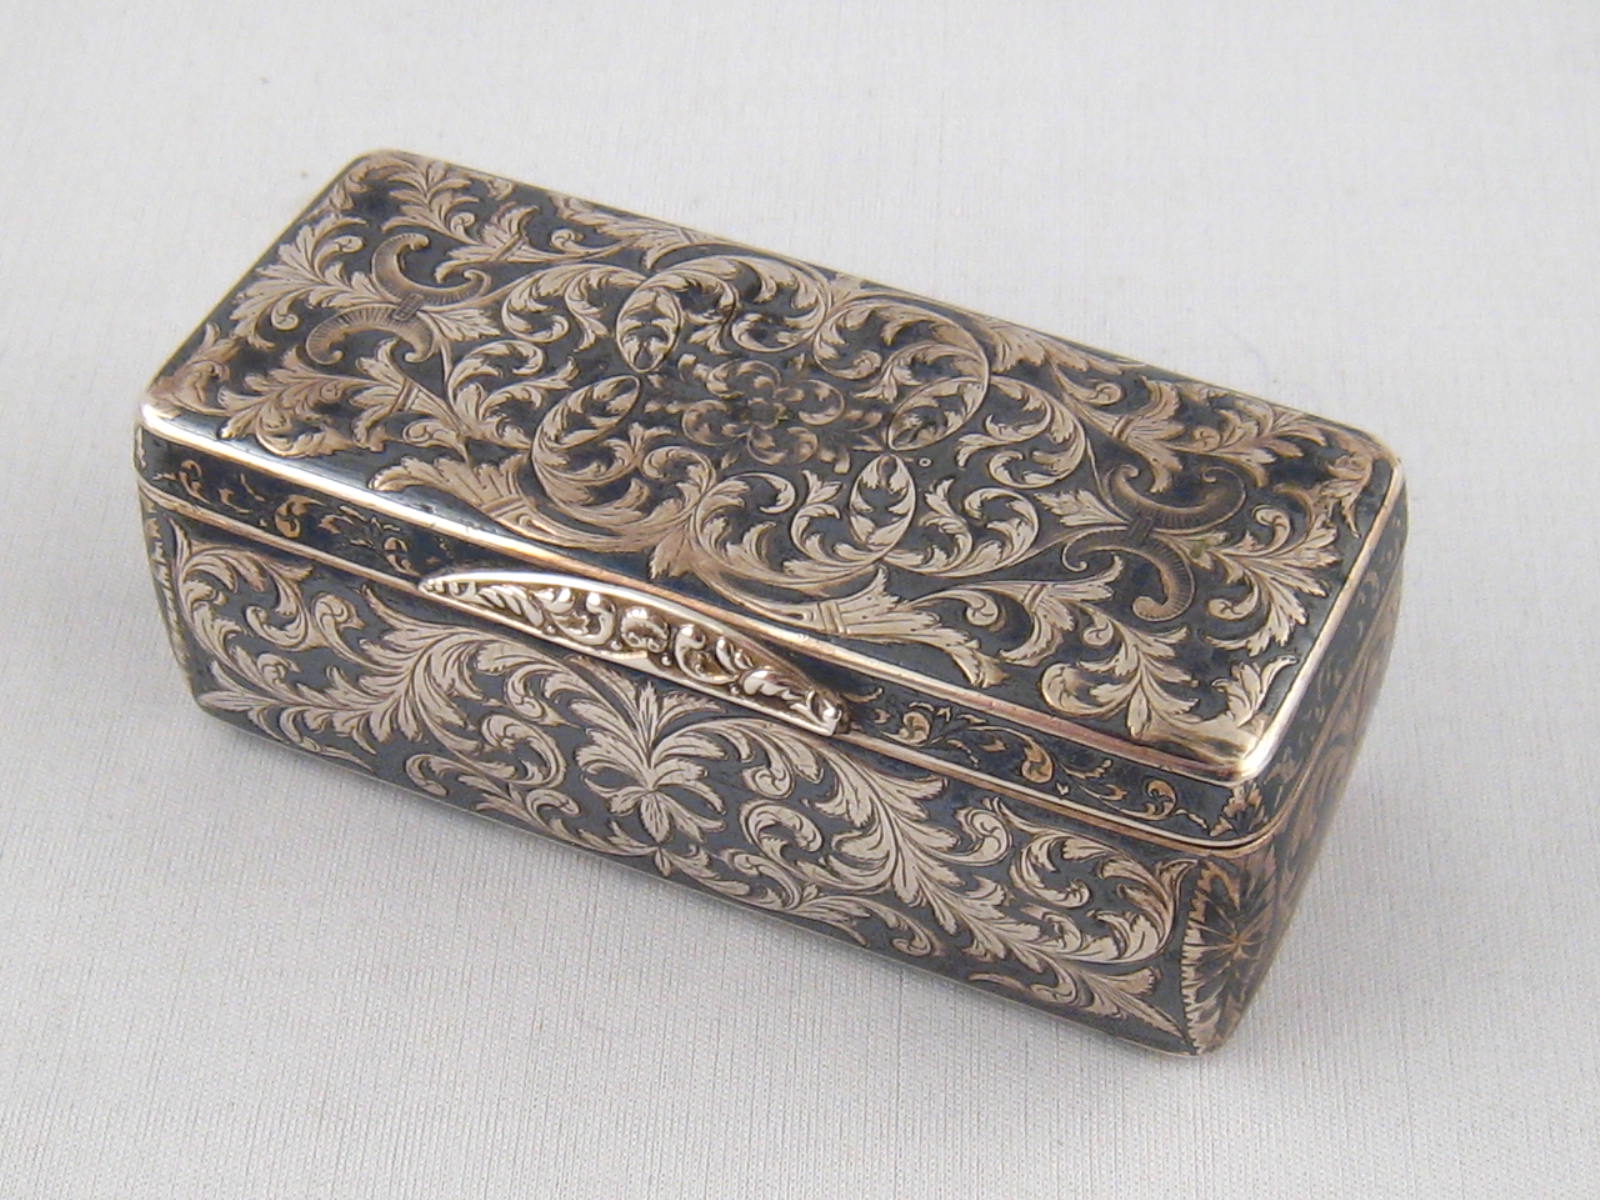 A Russian silver box with engraved scrolling, inset with niello. 9.5x4x3.5cm. Maker A.A., Moscow c.